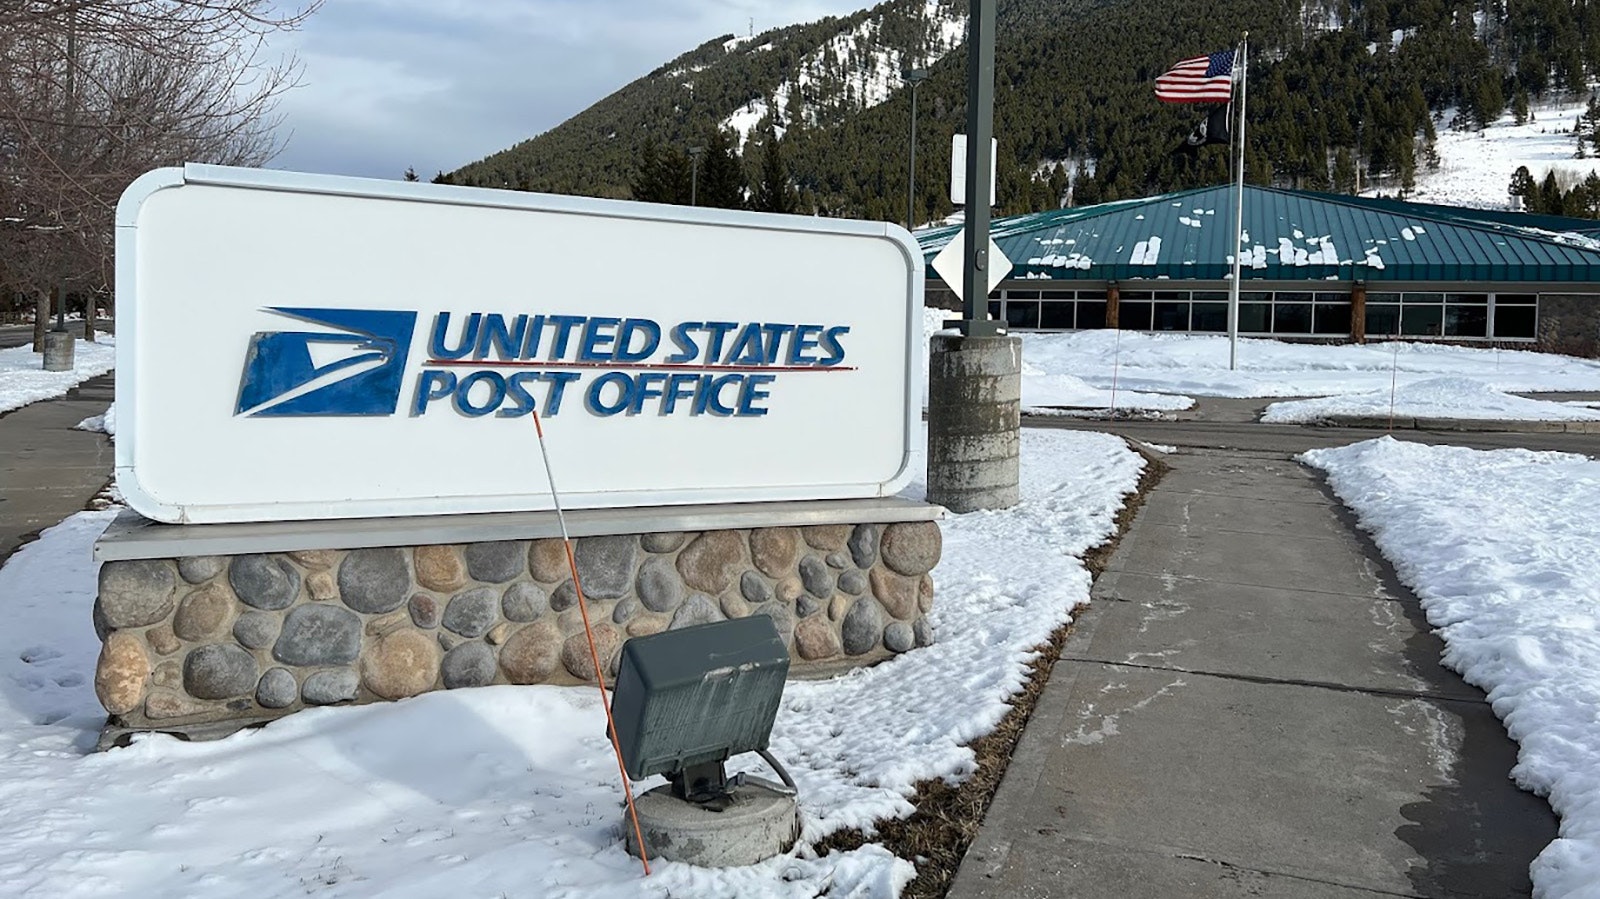 The U.S. Post Office act 1070 Maple Way in Jackson, Wyoming. While the area is the wealthiest in America, one thing people living there can't get is home mail service.